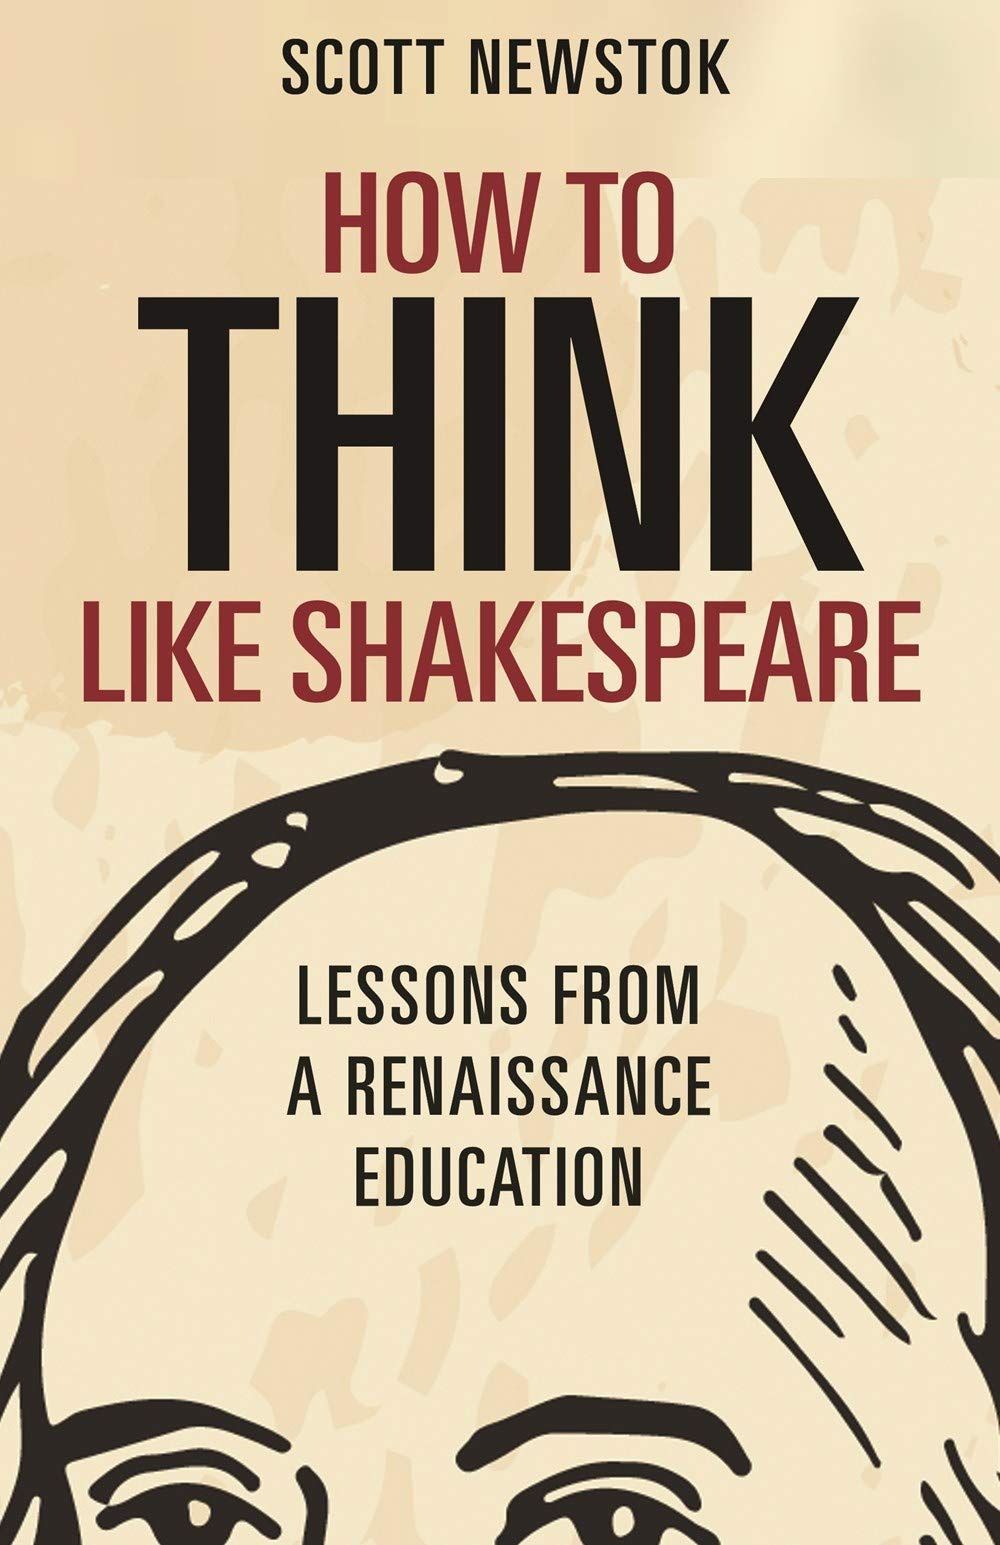 In Search of Shakespeare’s Mind